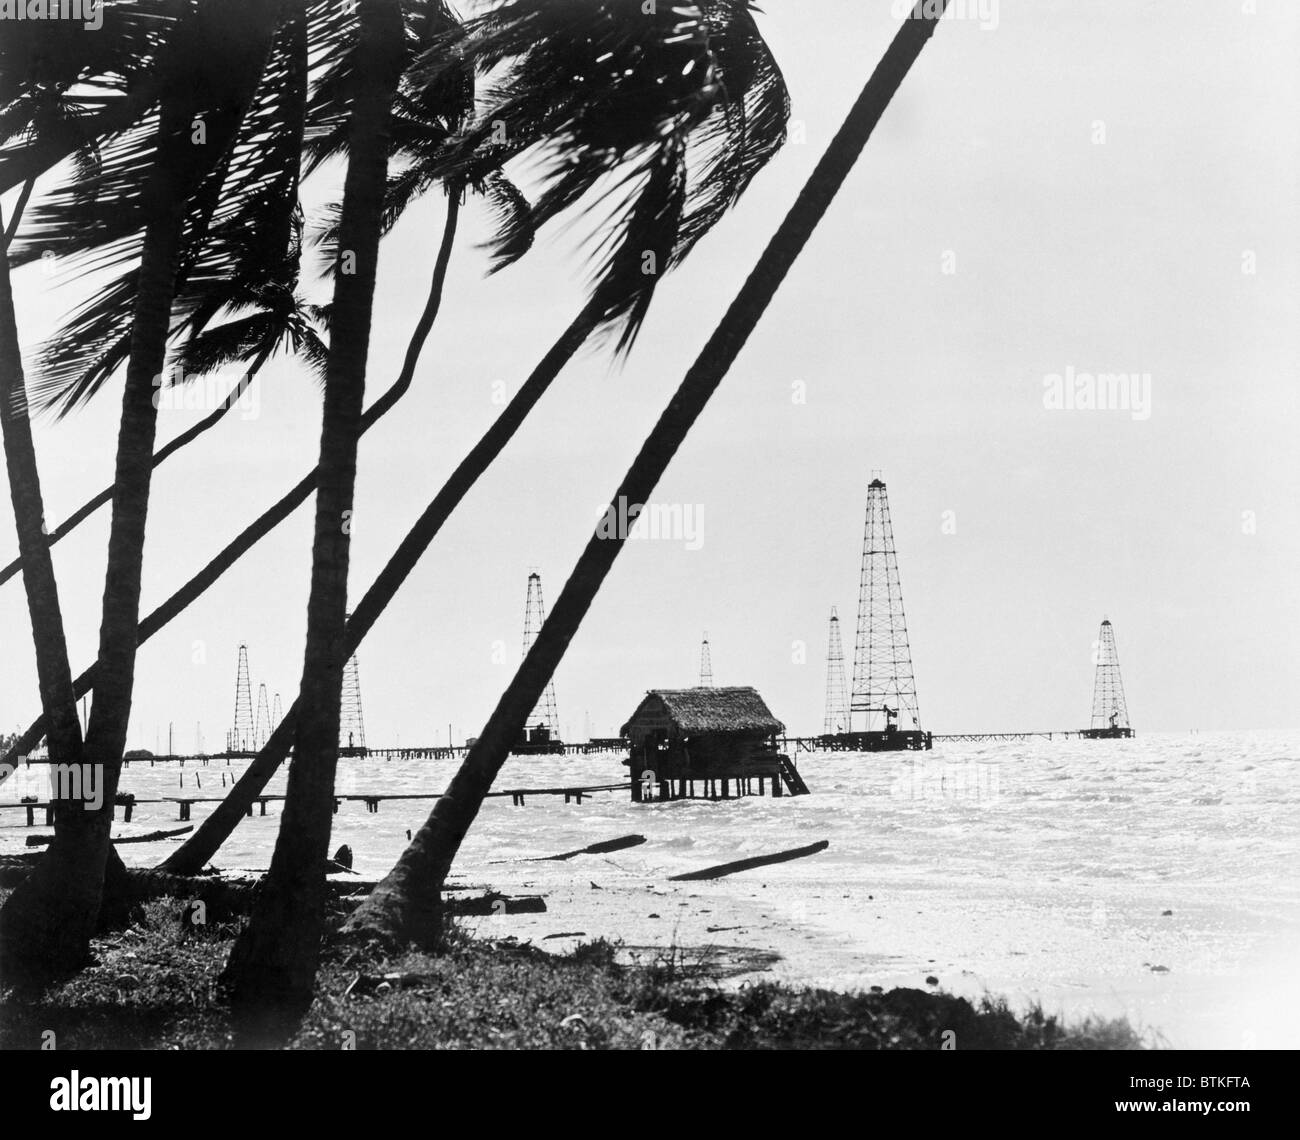 Oil derricks off the shore in Maracaibo Lake, Venezuela owned by Standard Oil Corporation of New Jersey. 1944. Stock Photo